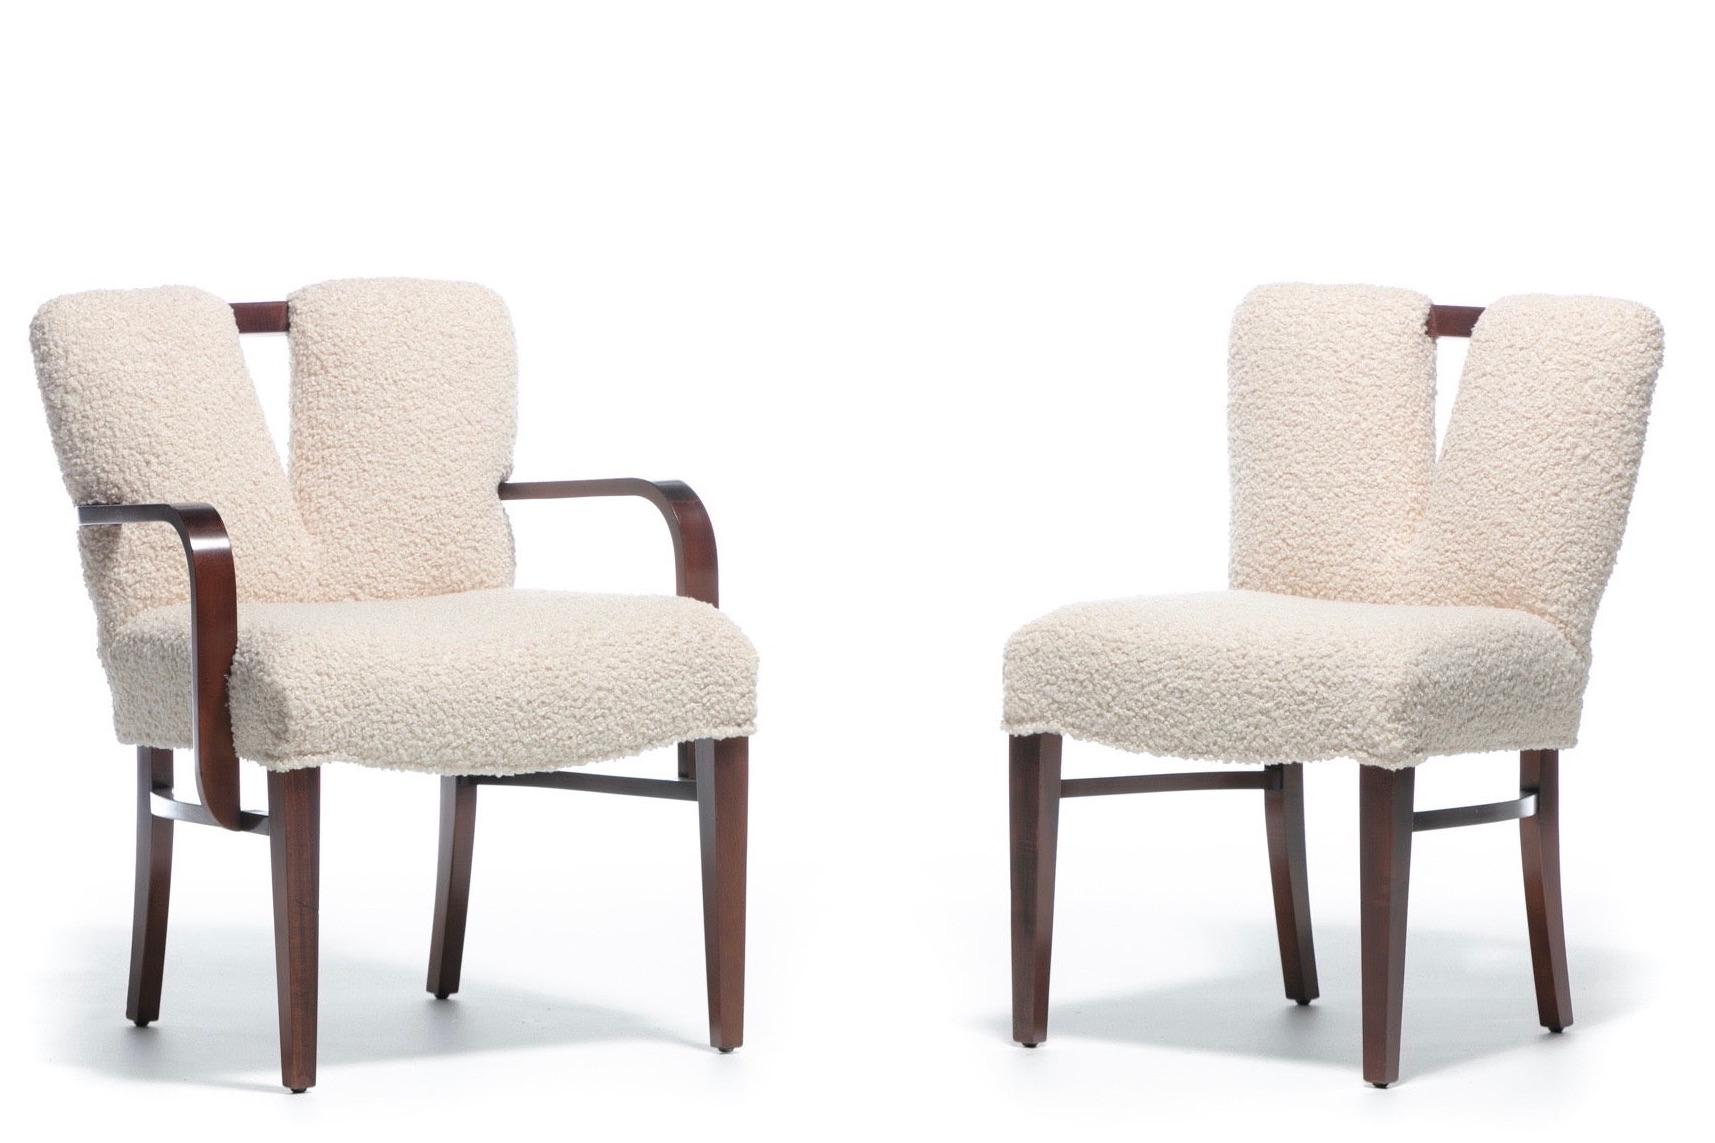 Mid-Century Modern Set of 18 Paul Frankl Corset Back Dining Chairs in Ivory White Bouclé, c. 1950s